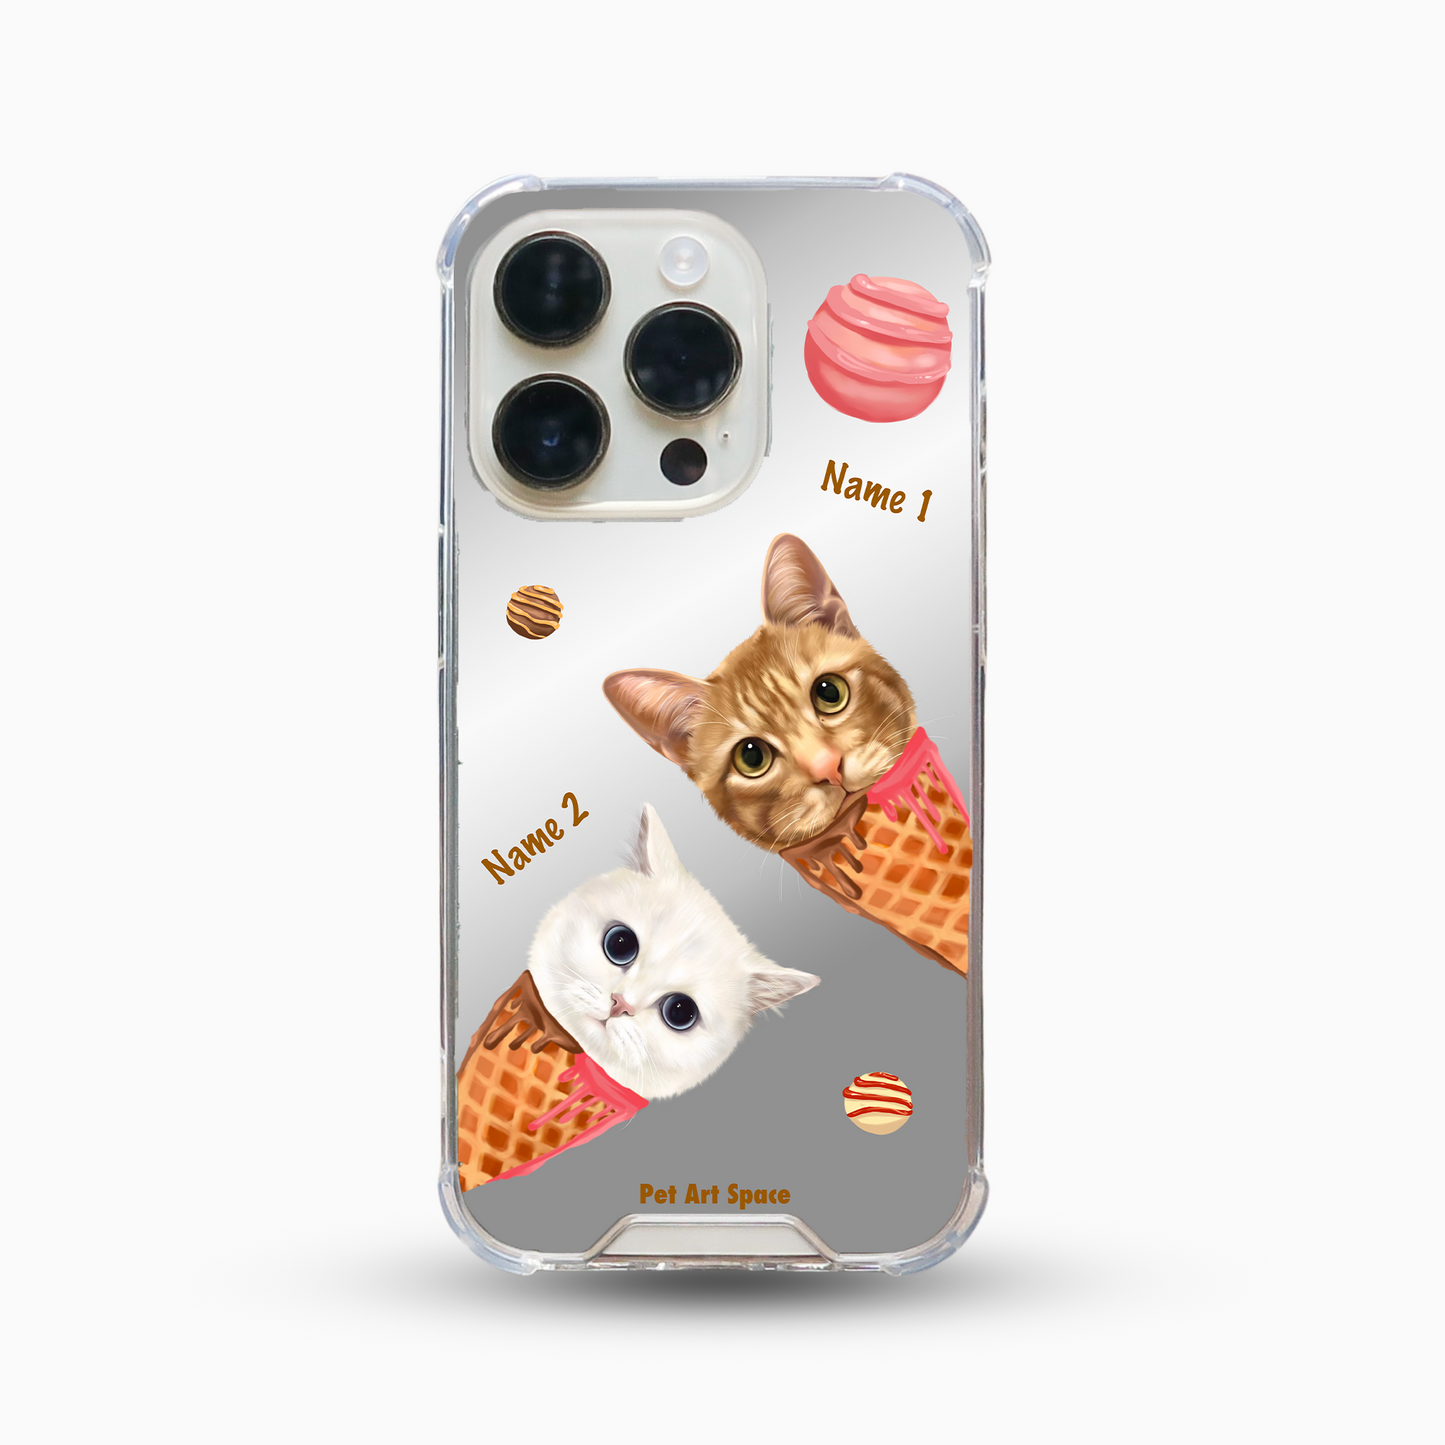 Ice Cream B for 2 pets - Mirror Case A